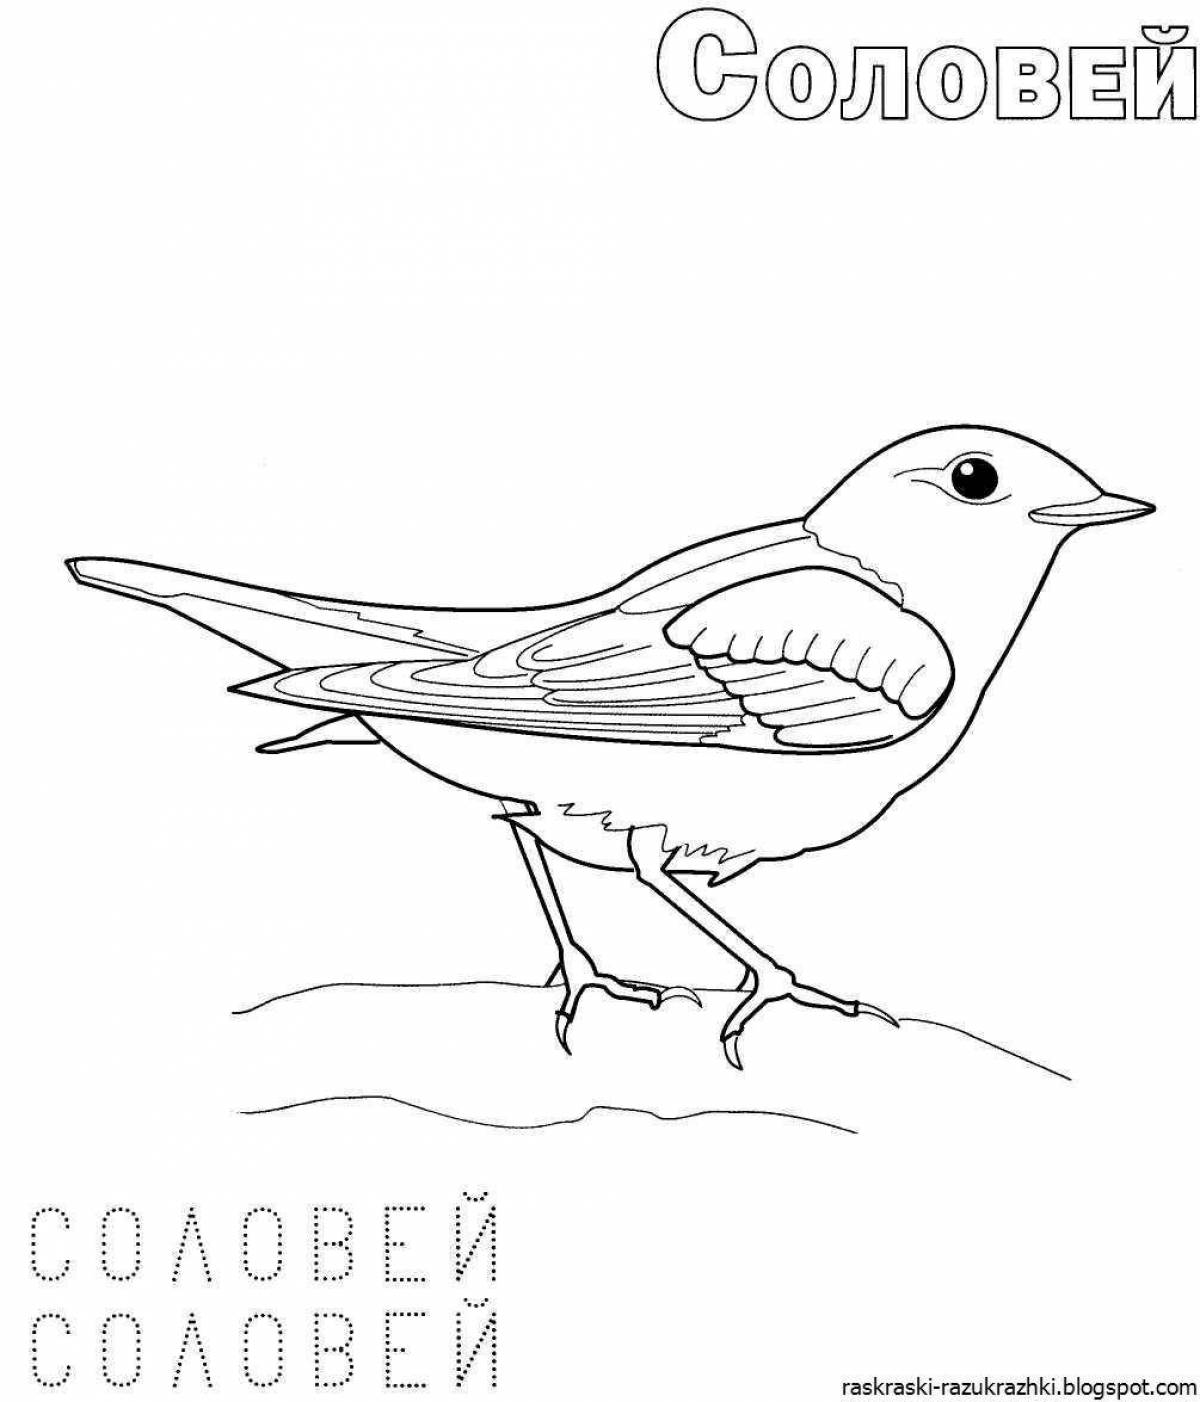 Great coloring pages of migratory birds for kids